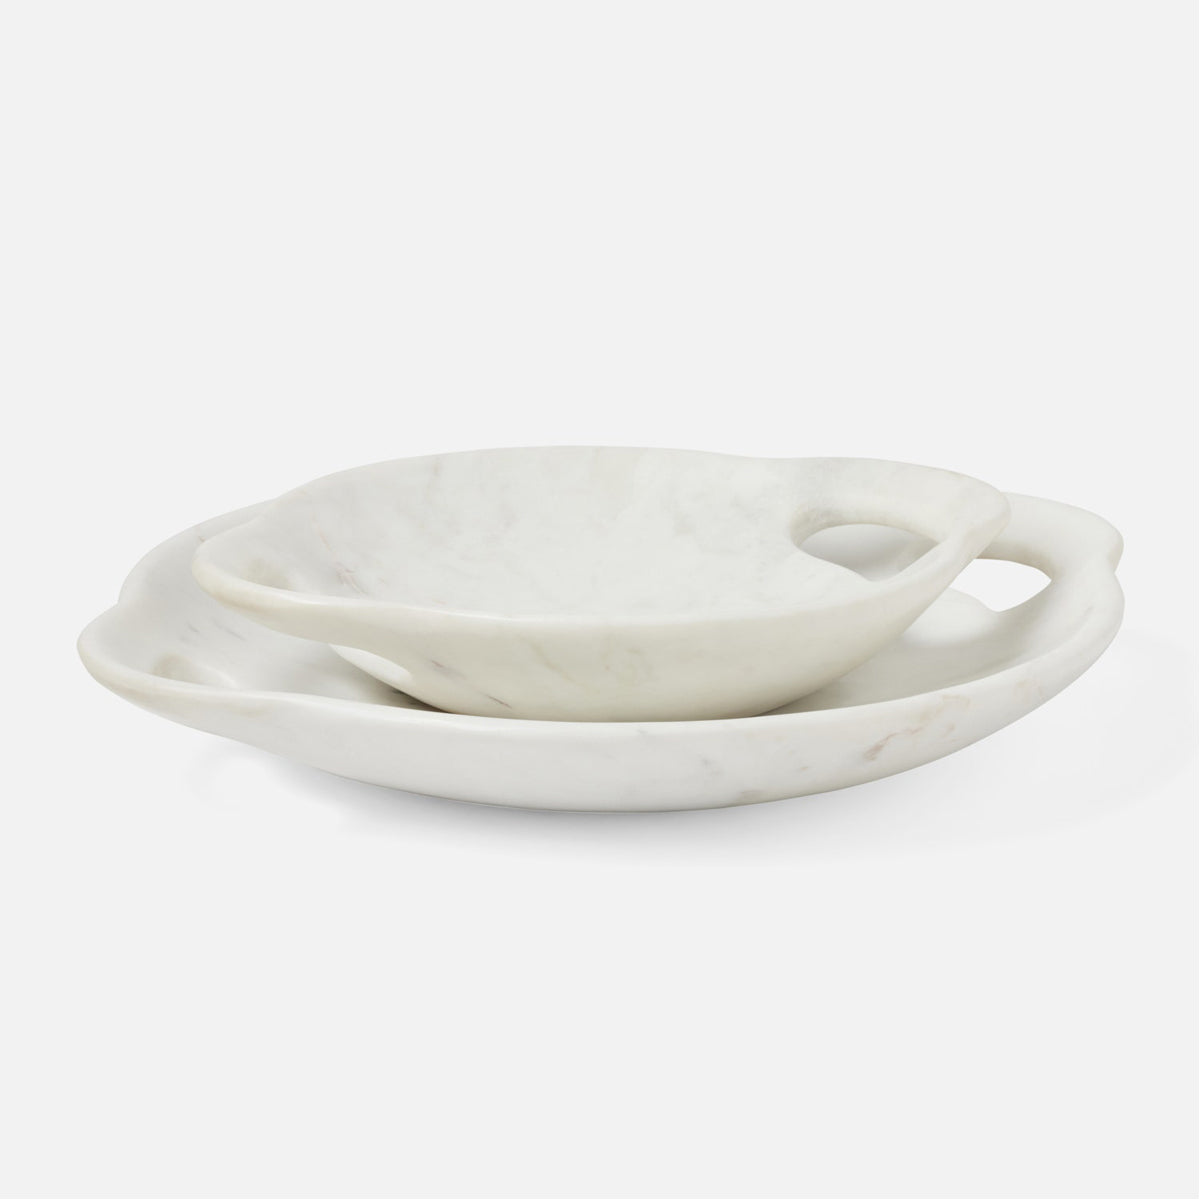 Made Goods Janes Marble Tray, 2-Piece Set